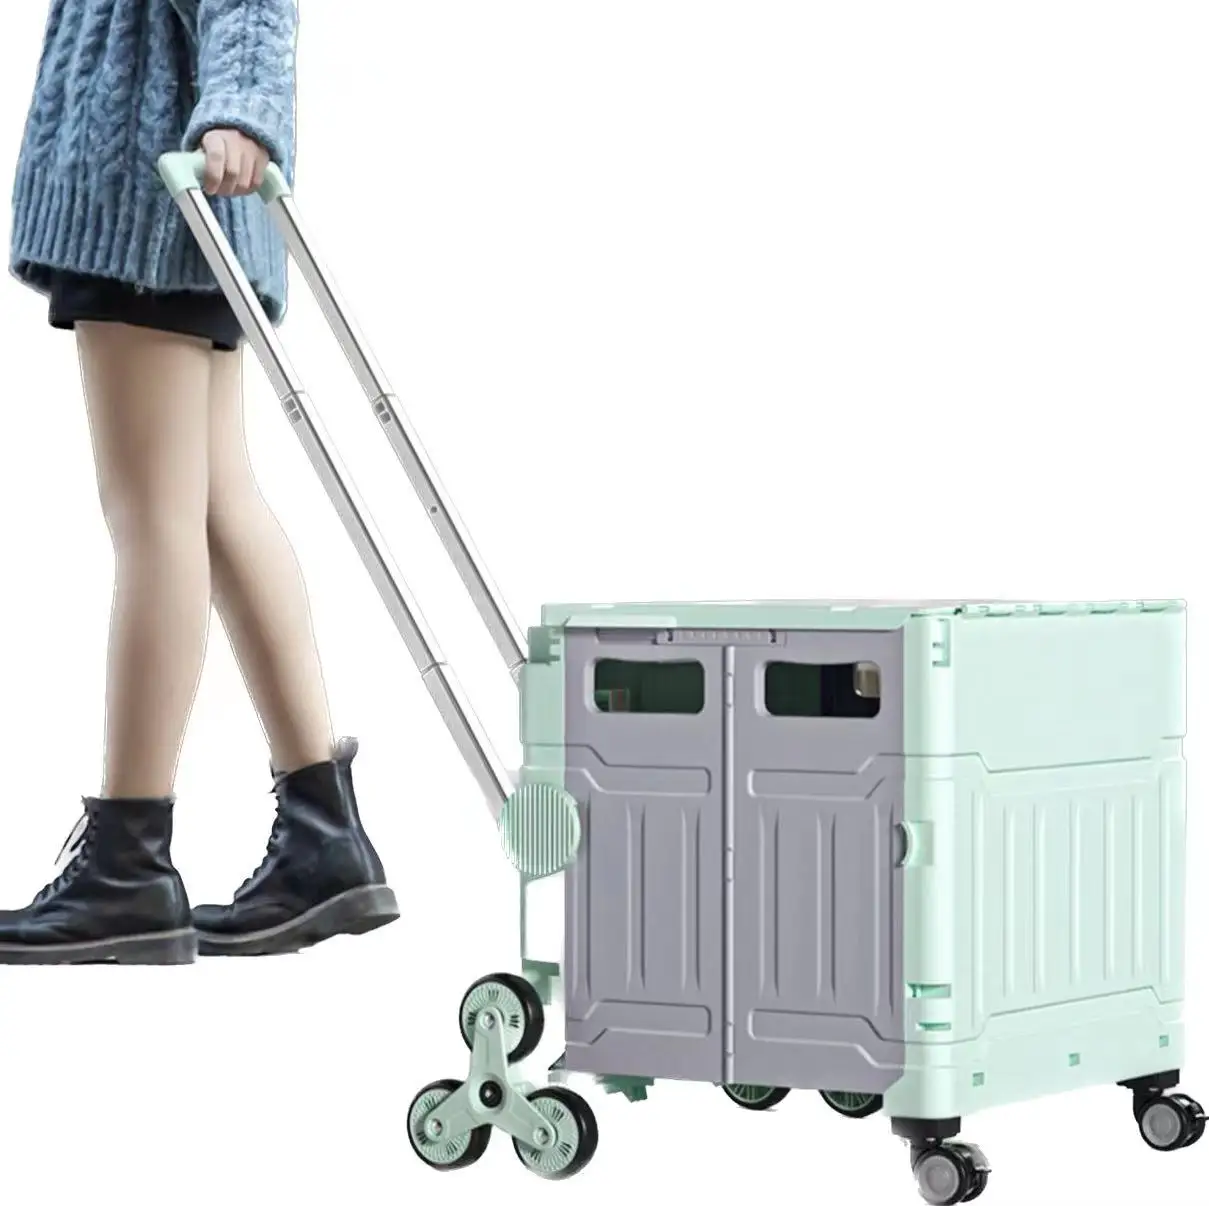 

Uni-Silent Supermarket Shopping Truck Foldable Plastic Trolley Portable Carry Folding Hand Trolley Cart FST85-6S